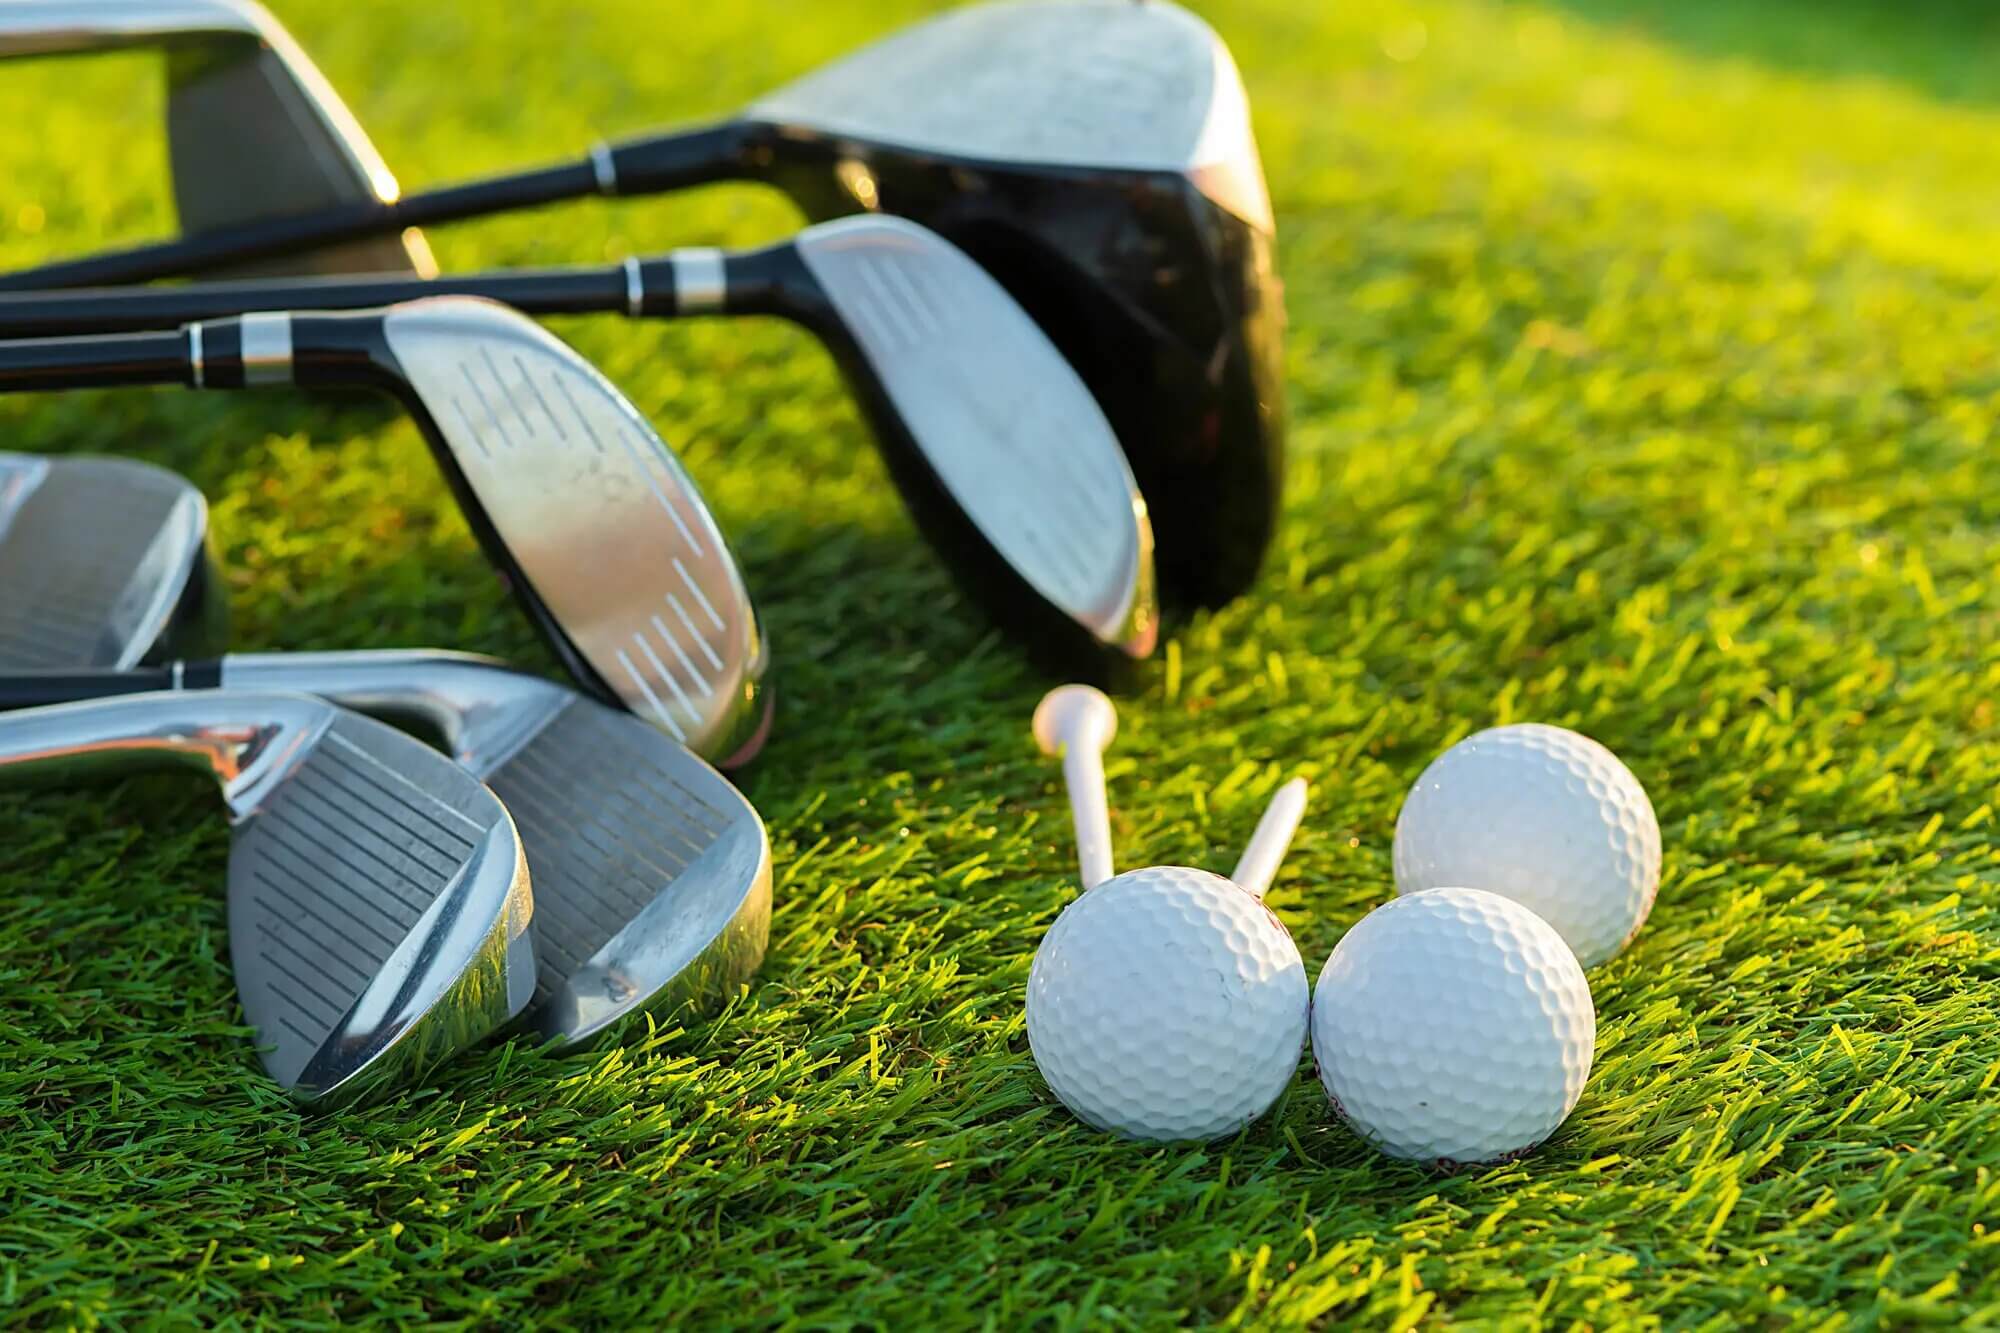 A Set of Premium Golf Clubs or Golf Lessons